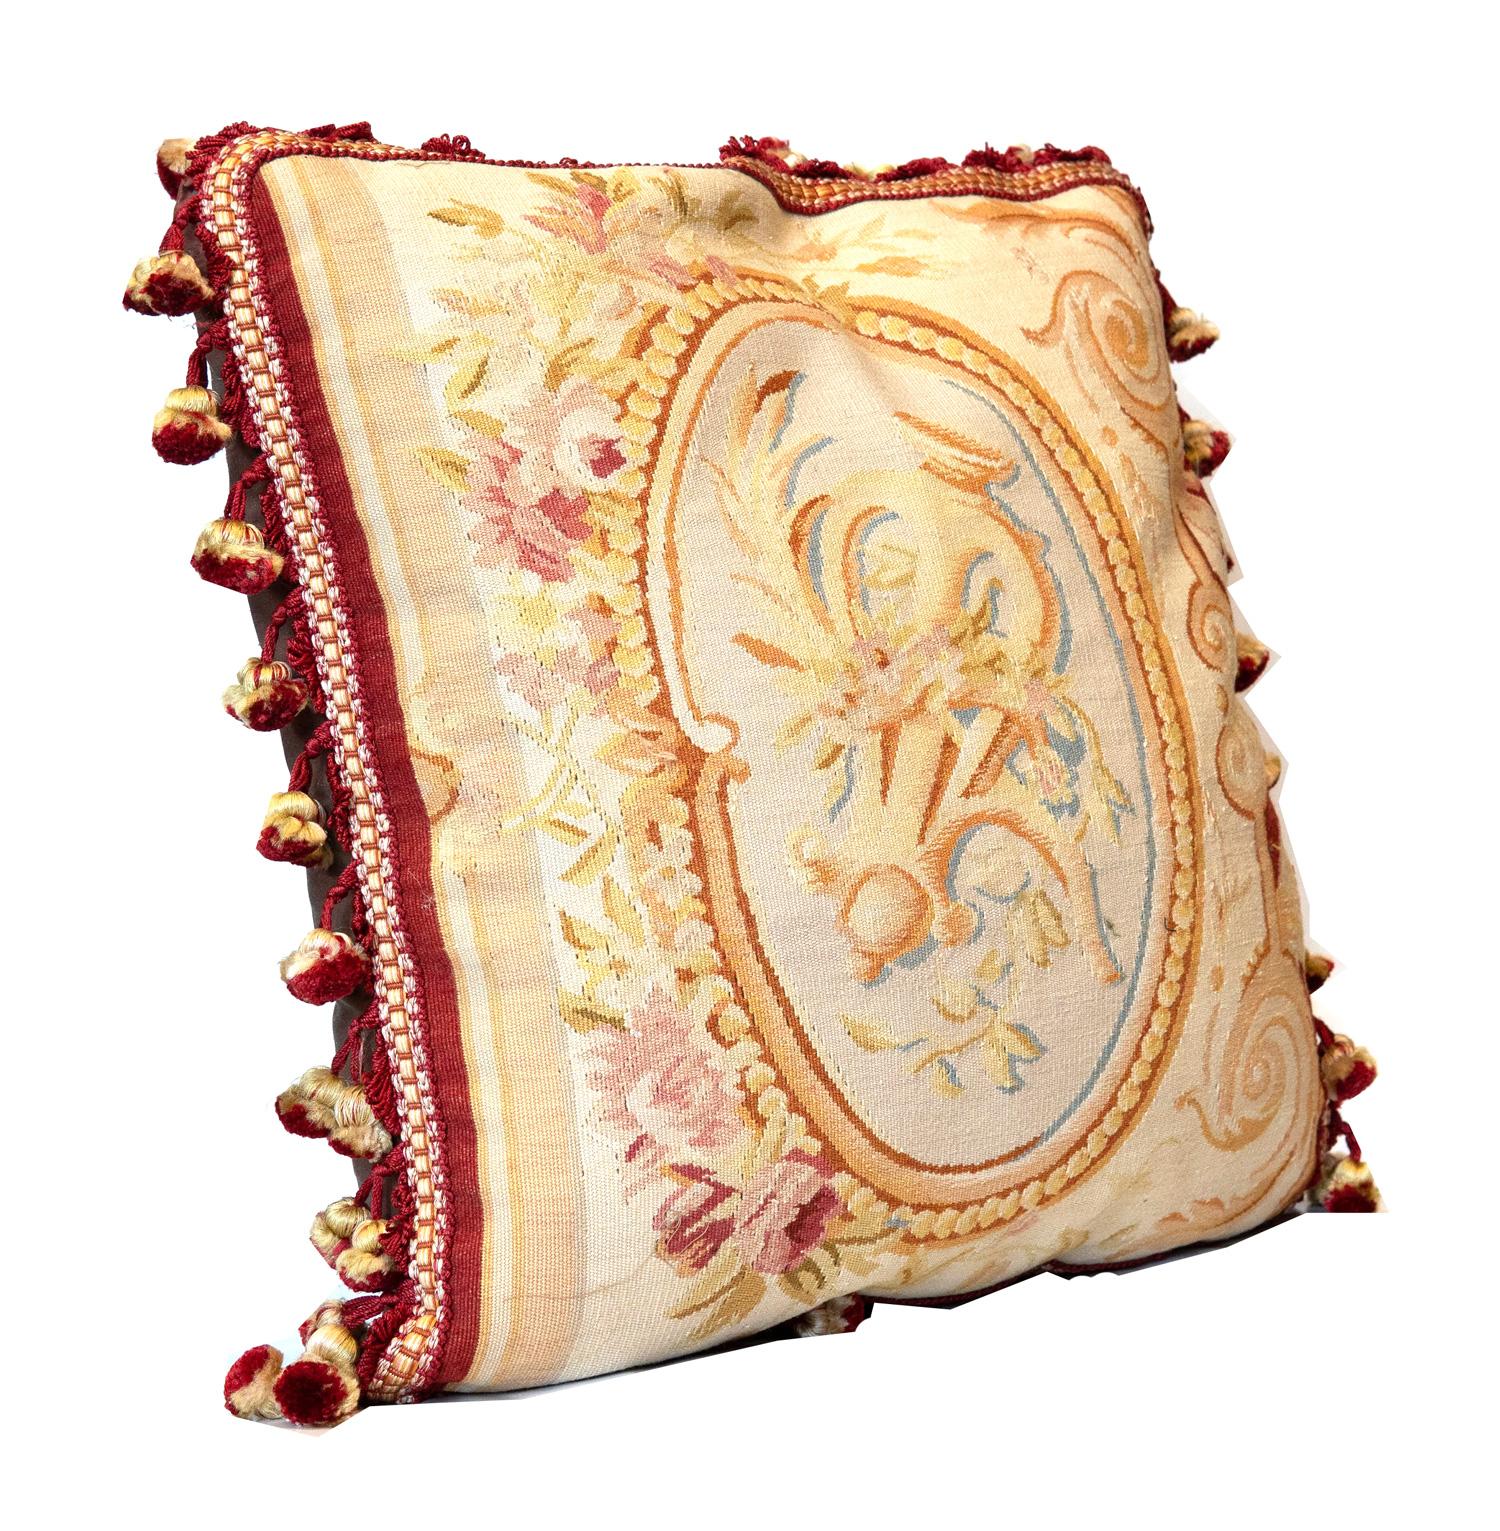 These cushions are fine examples of needlepoints from the 1990s, constructed in china with the traditional french Aubusson style and technique. These Aubusson style cushions feature a floral cameo design in the centre woven in accents of brown and